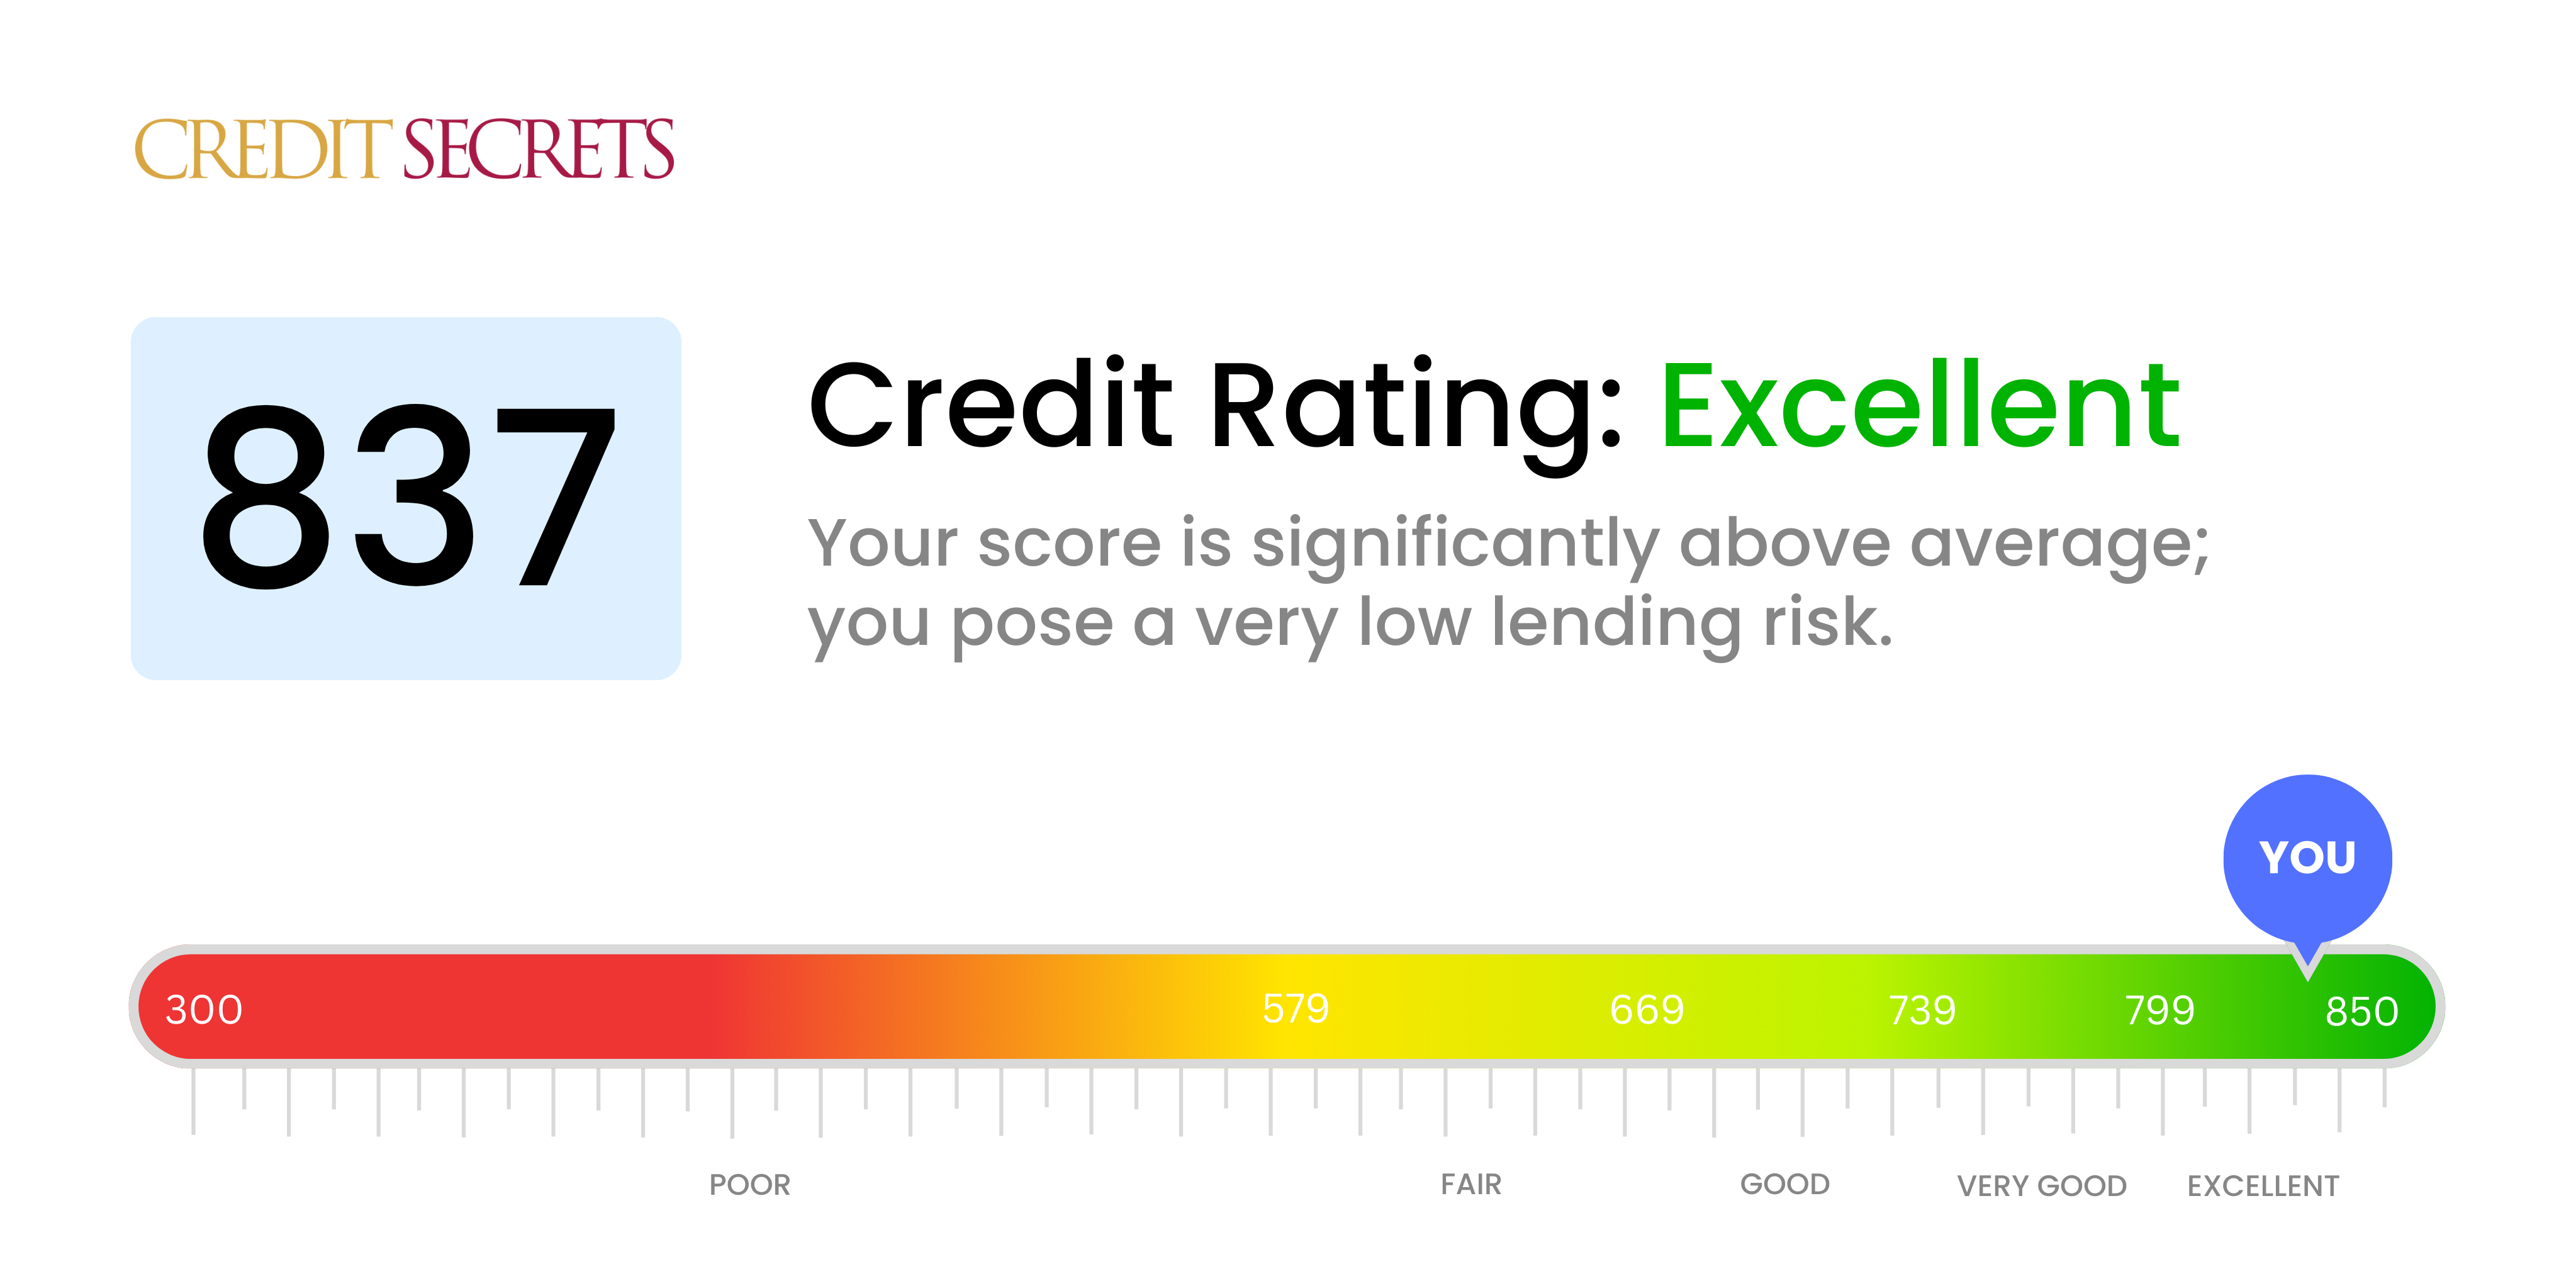 Is 837 a good credit score?